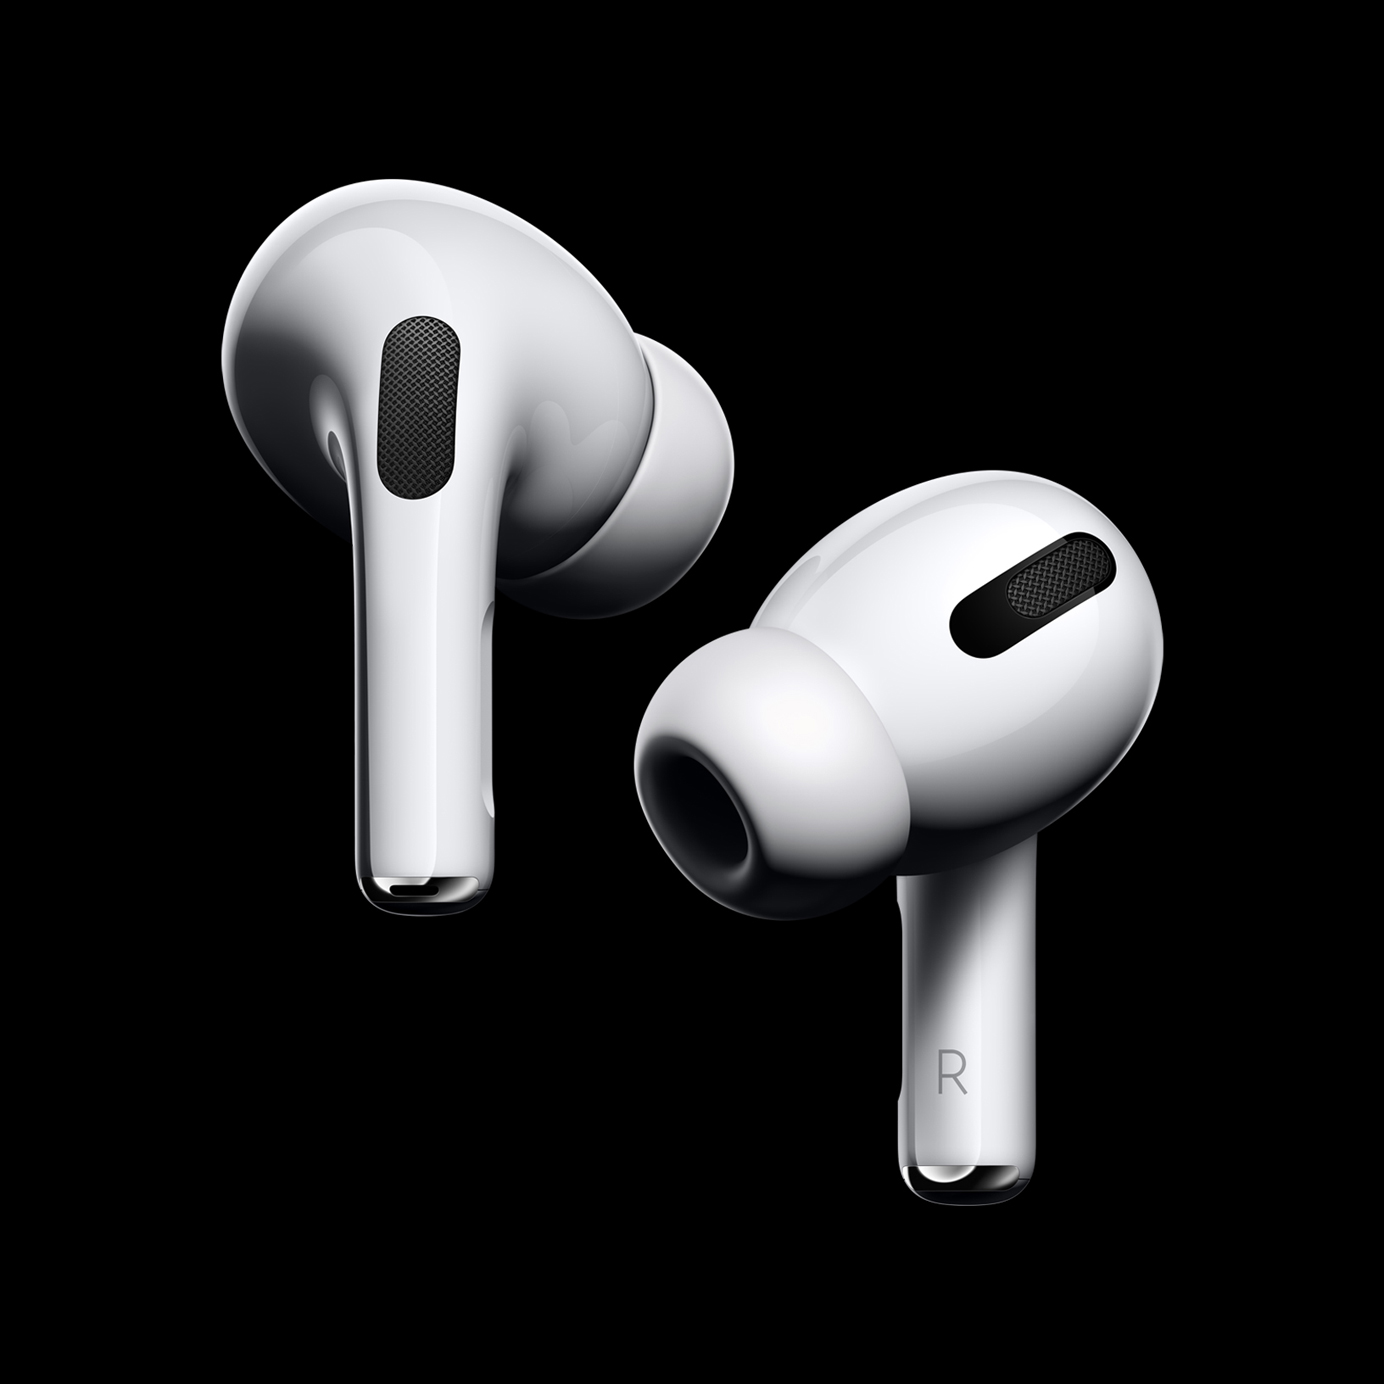 AirPods Pro early impressions roundup: impressive sound quality, solid fit, and more